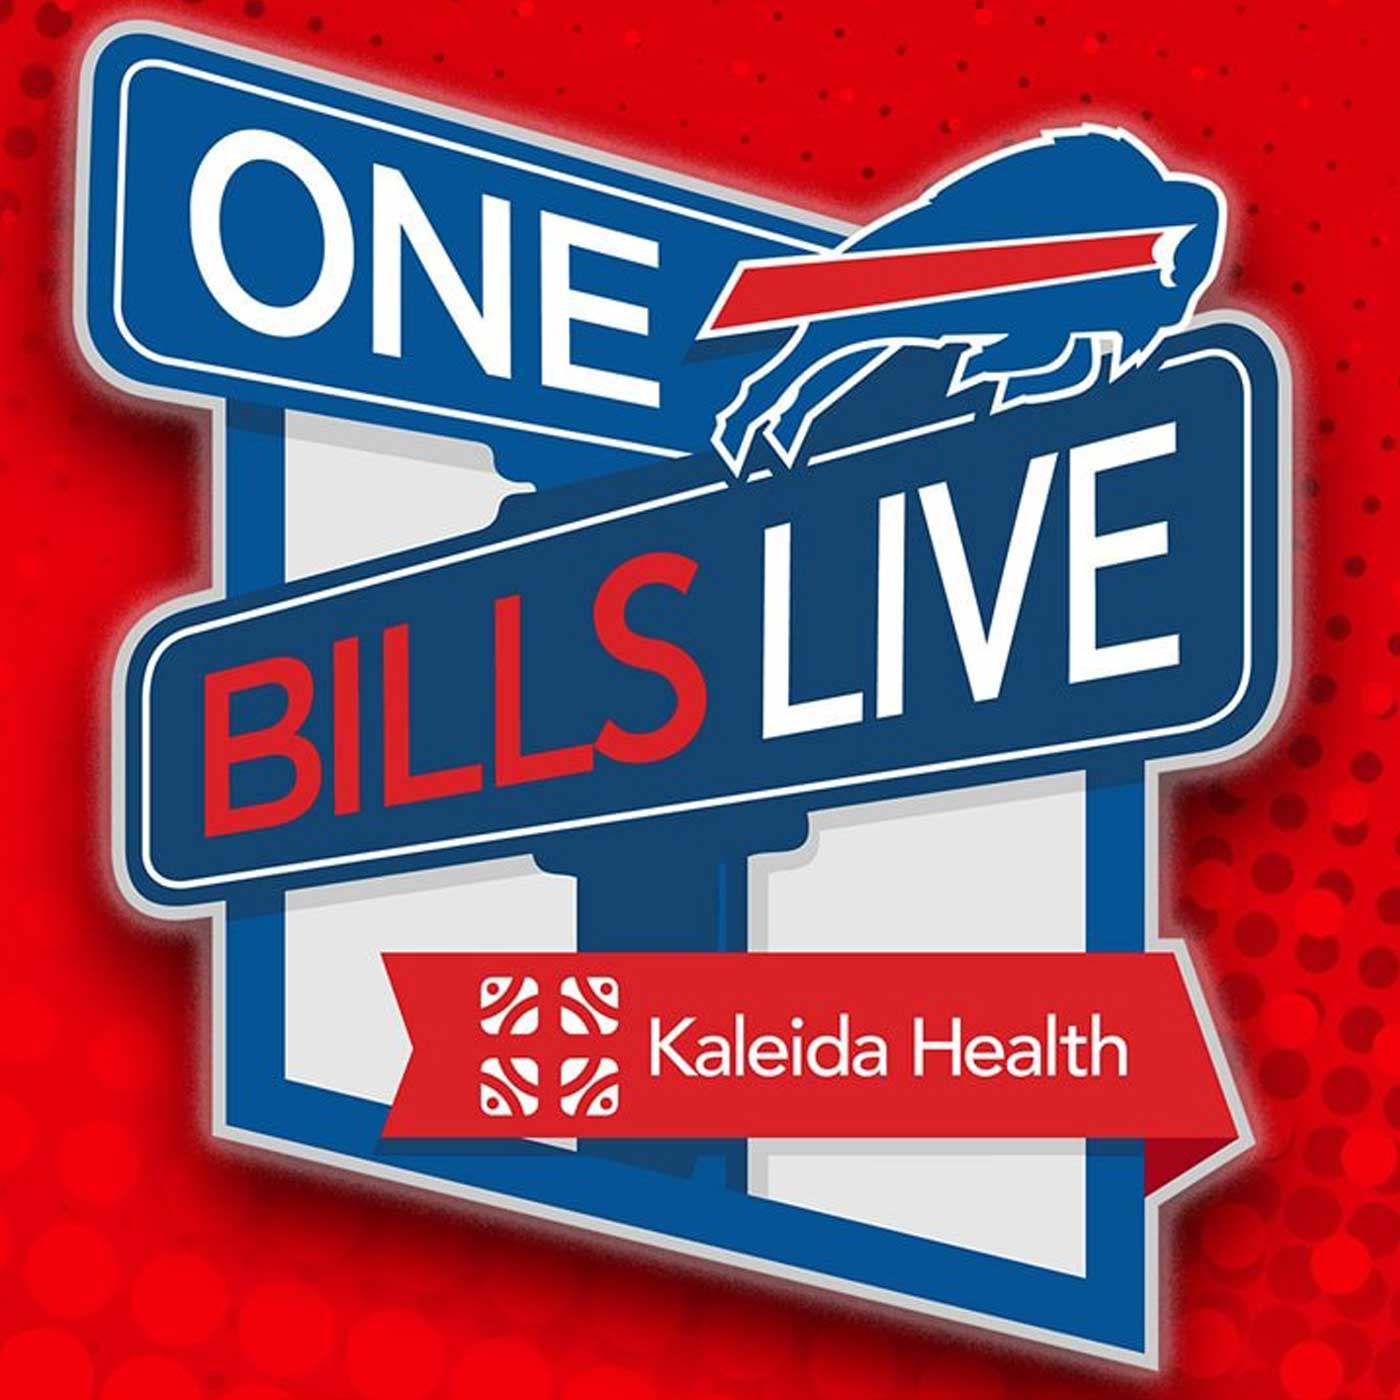 OBL 10/14: Brian Baldinger and Eric Wood analyze the Bills loss to the Titans